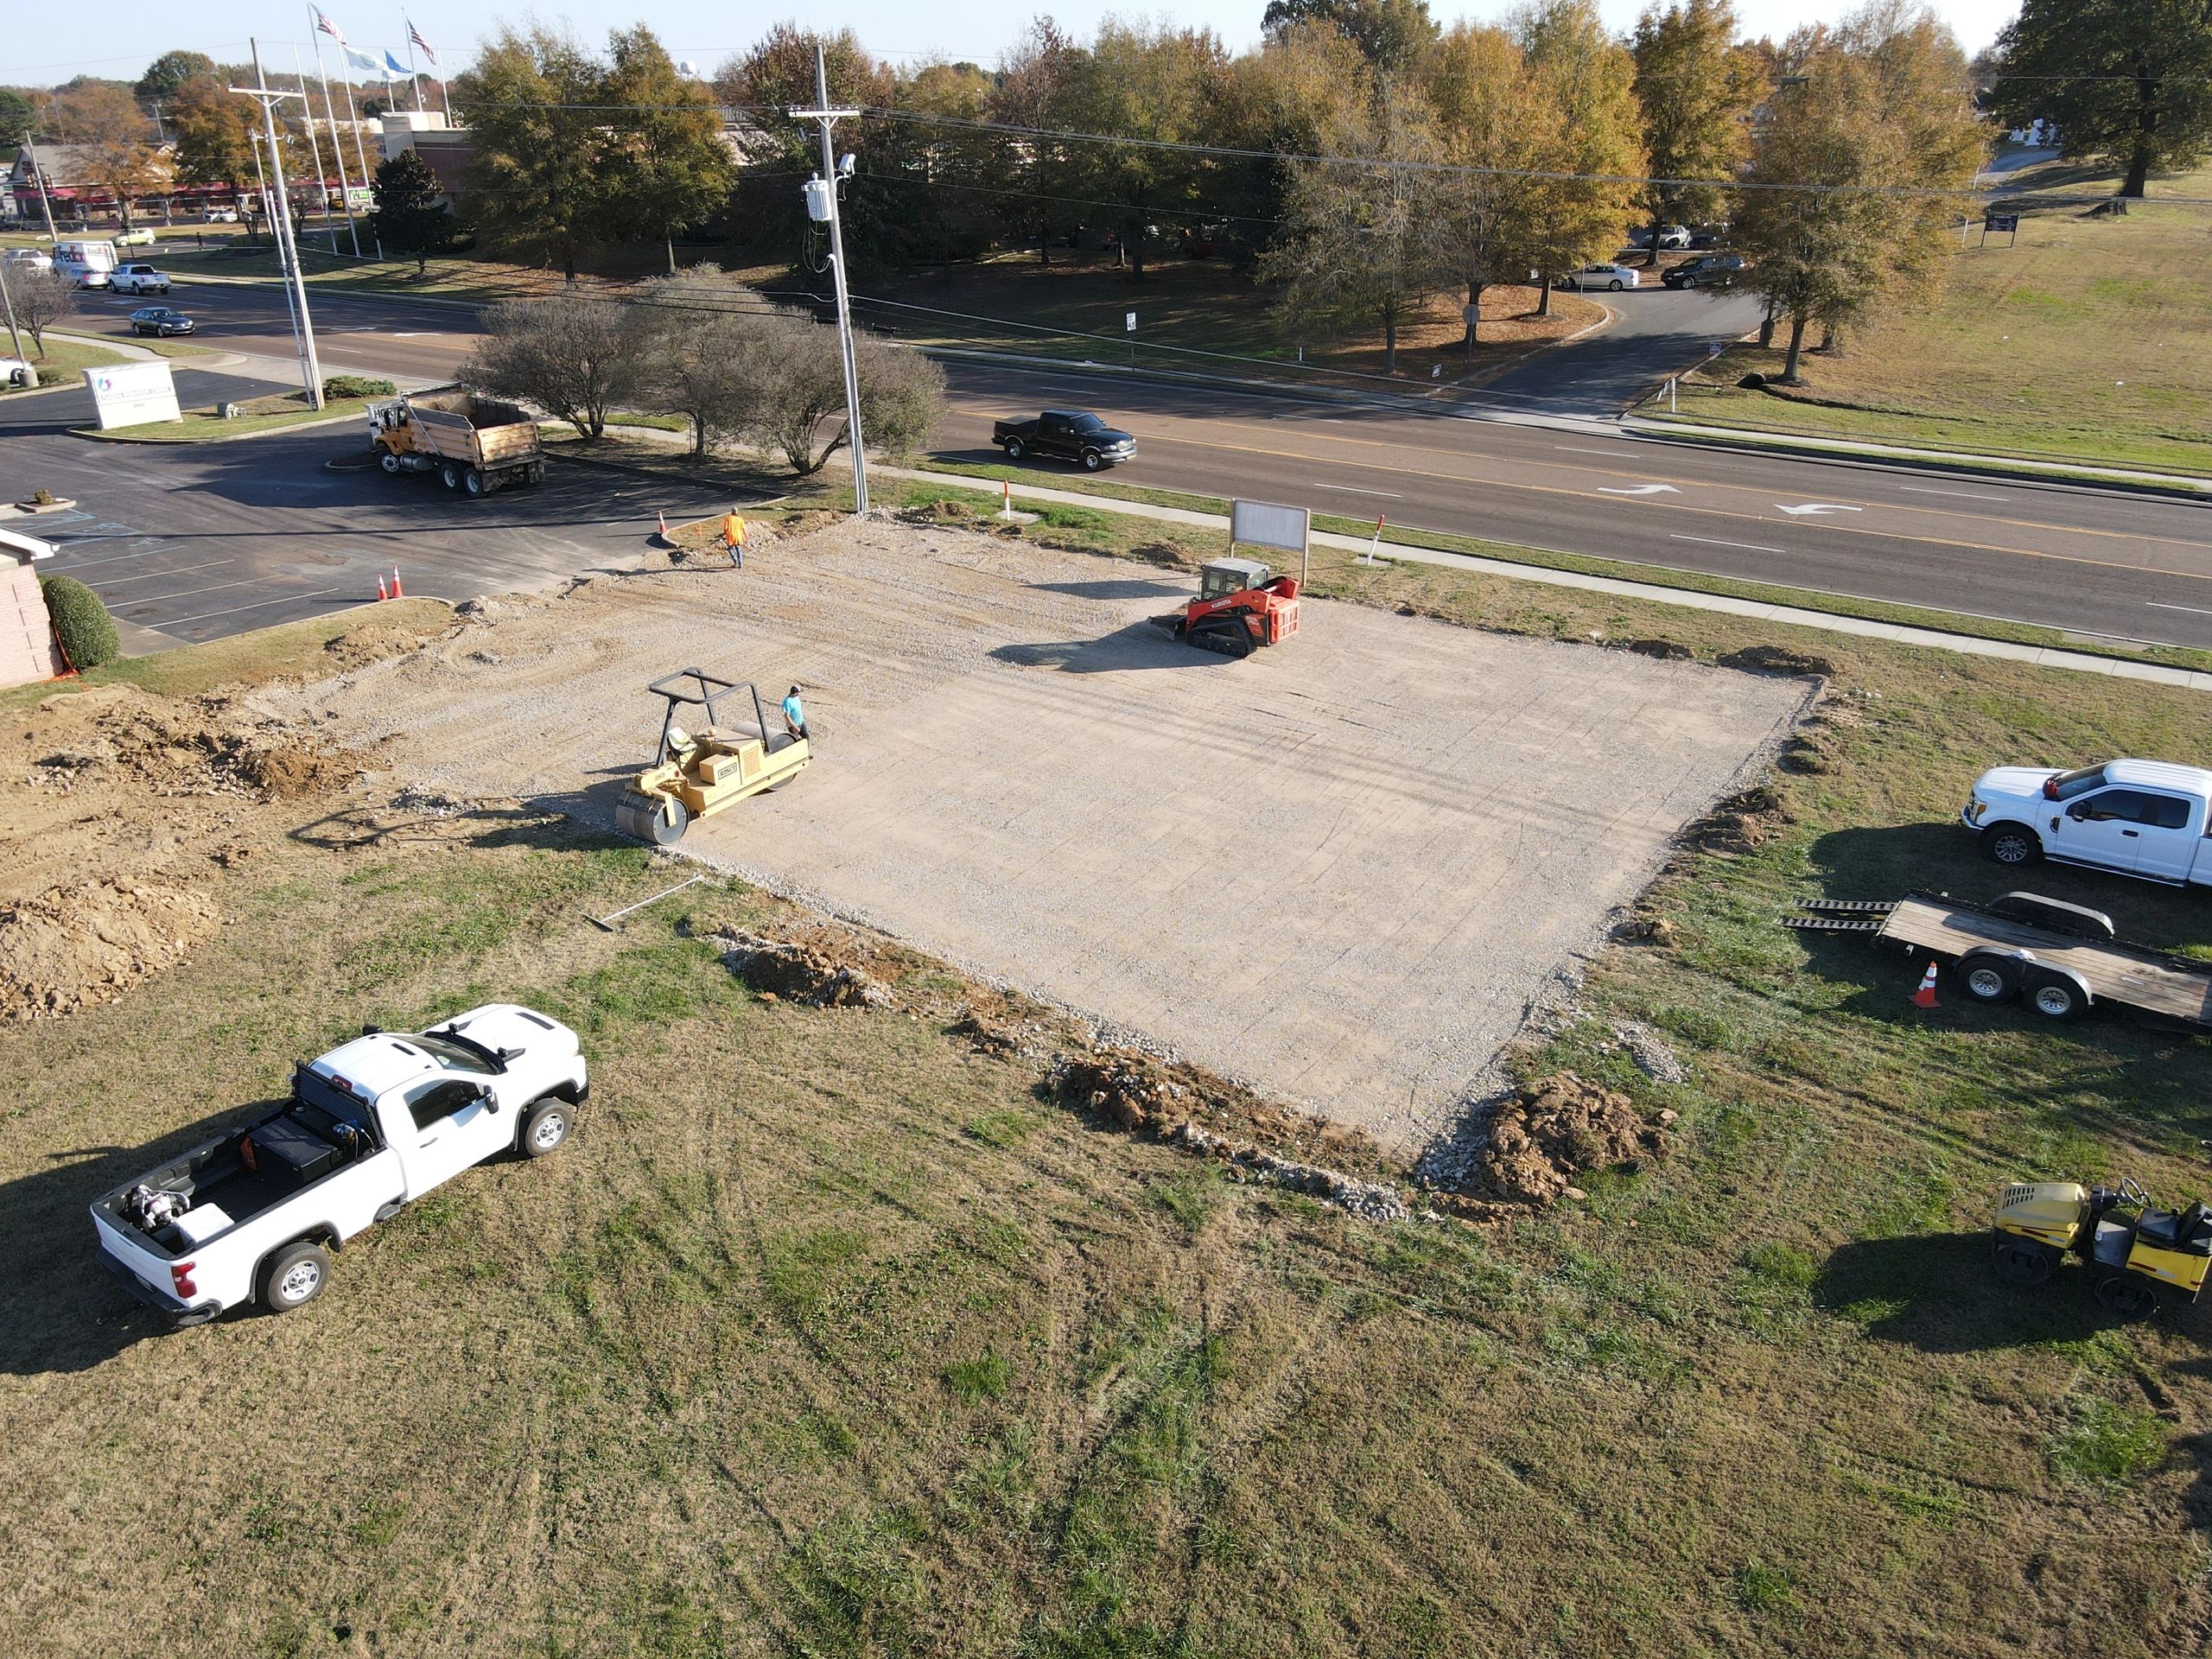 Finish grading and compacting the sub-base for a new parking lot that we will be paving.